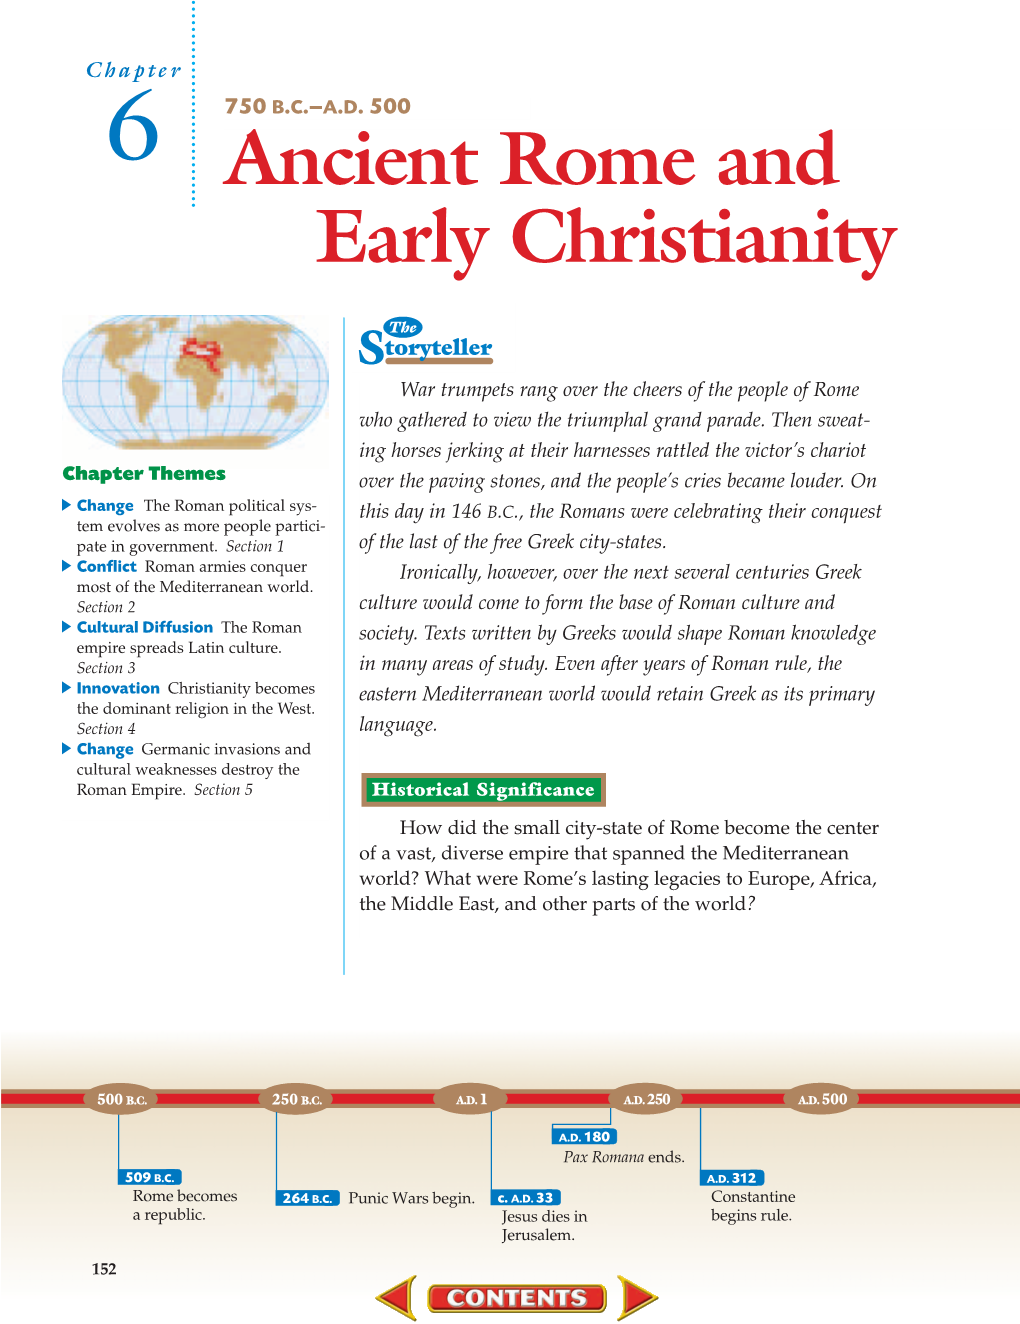 Chapter 6: Ancient Rome and Early Christianity